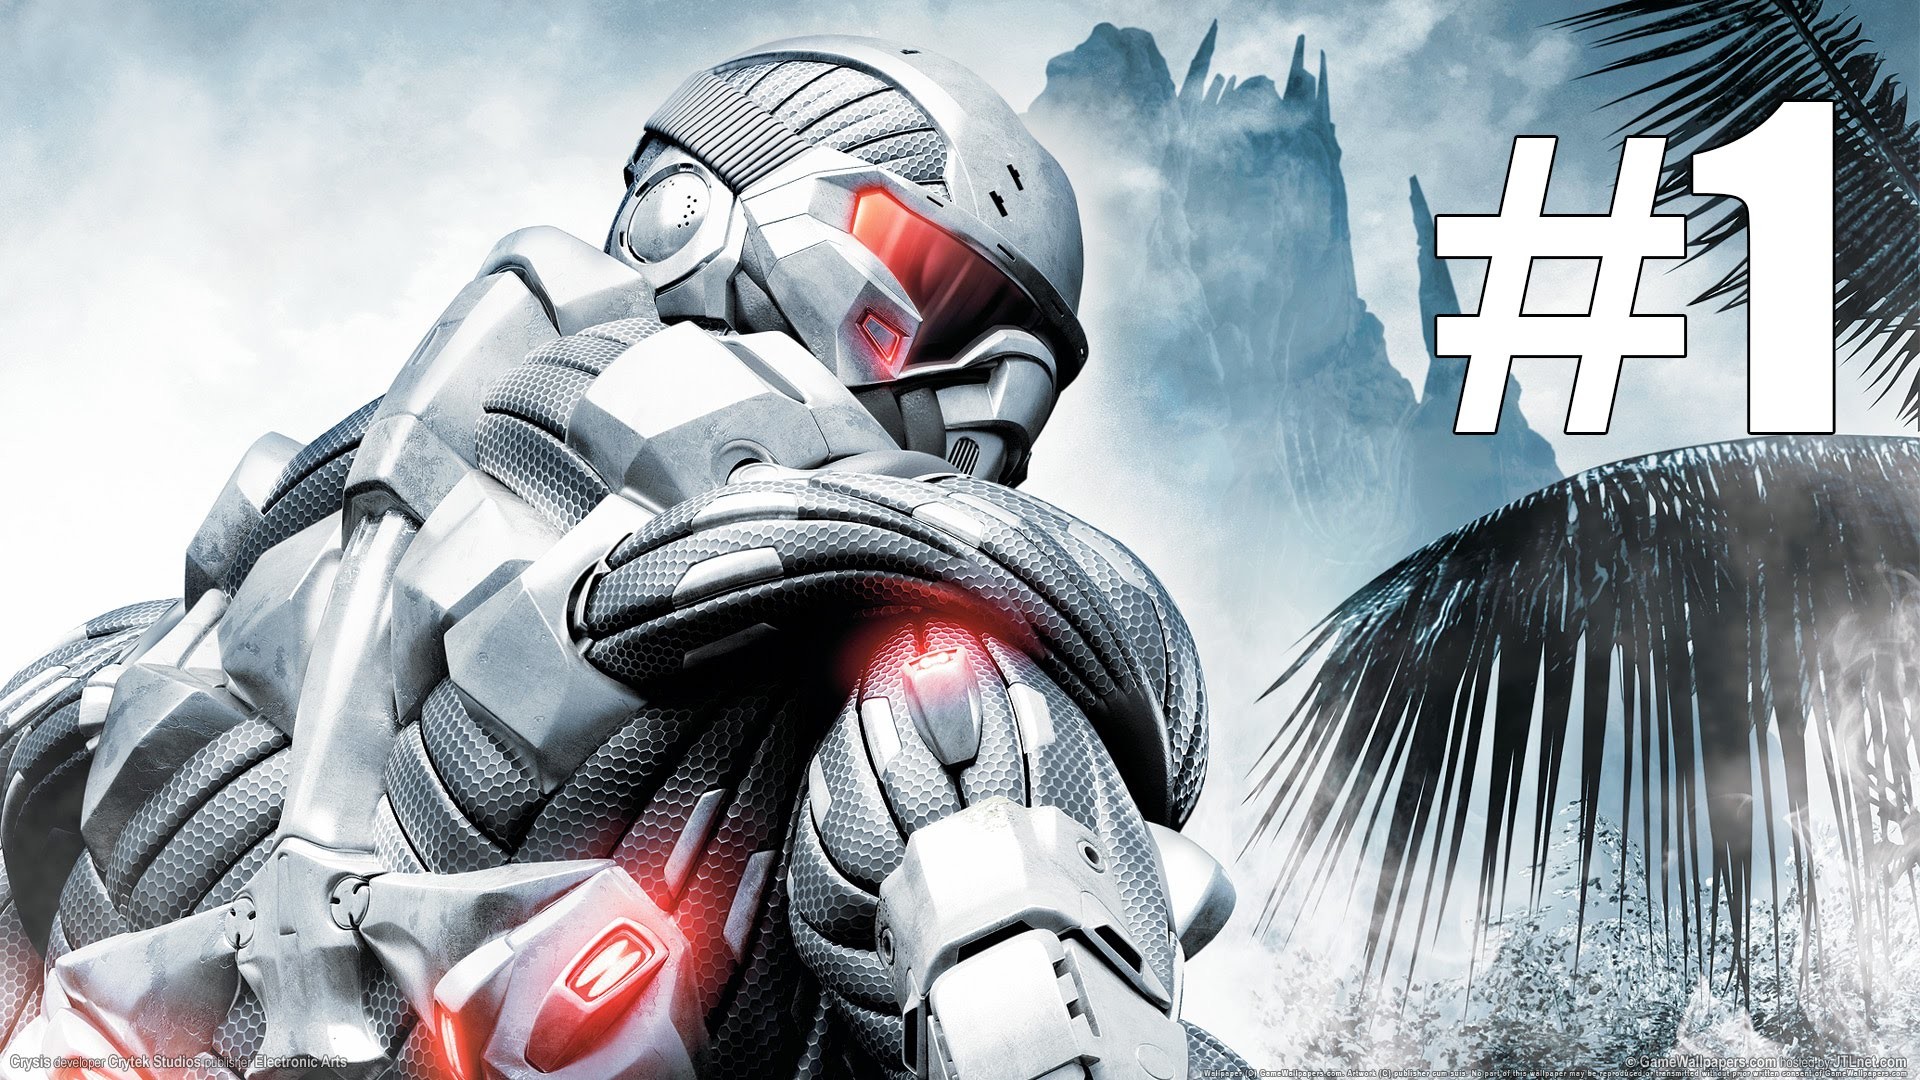 1920x1080 Crysis 1 Gameplay Walkthrough Part 1 No Commentary (PC) [60fps] - YouTube